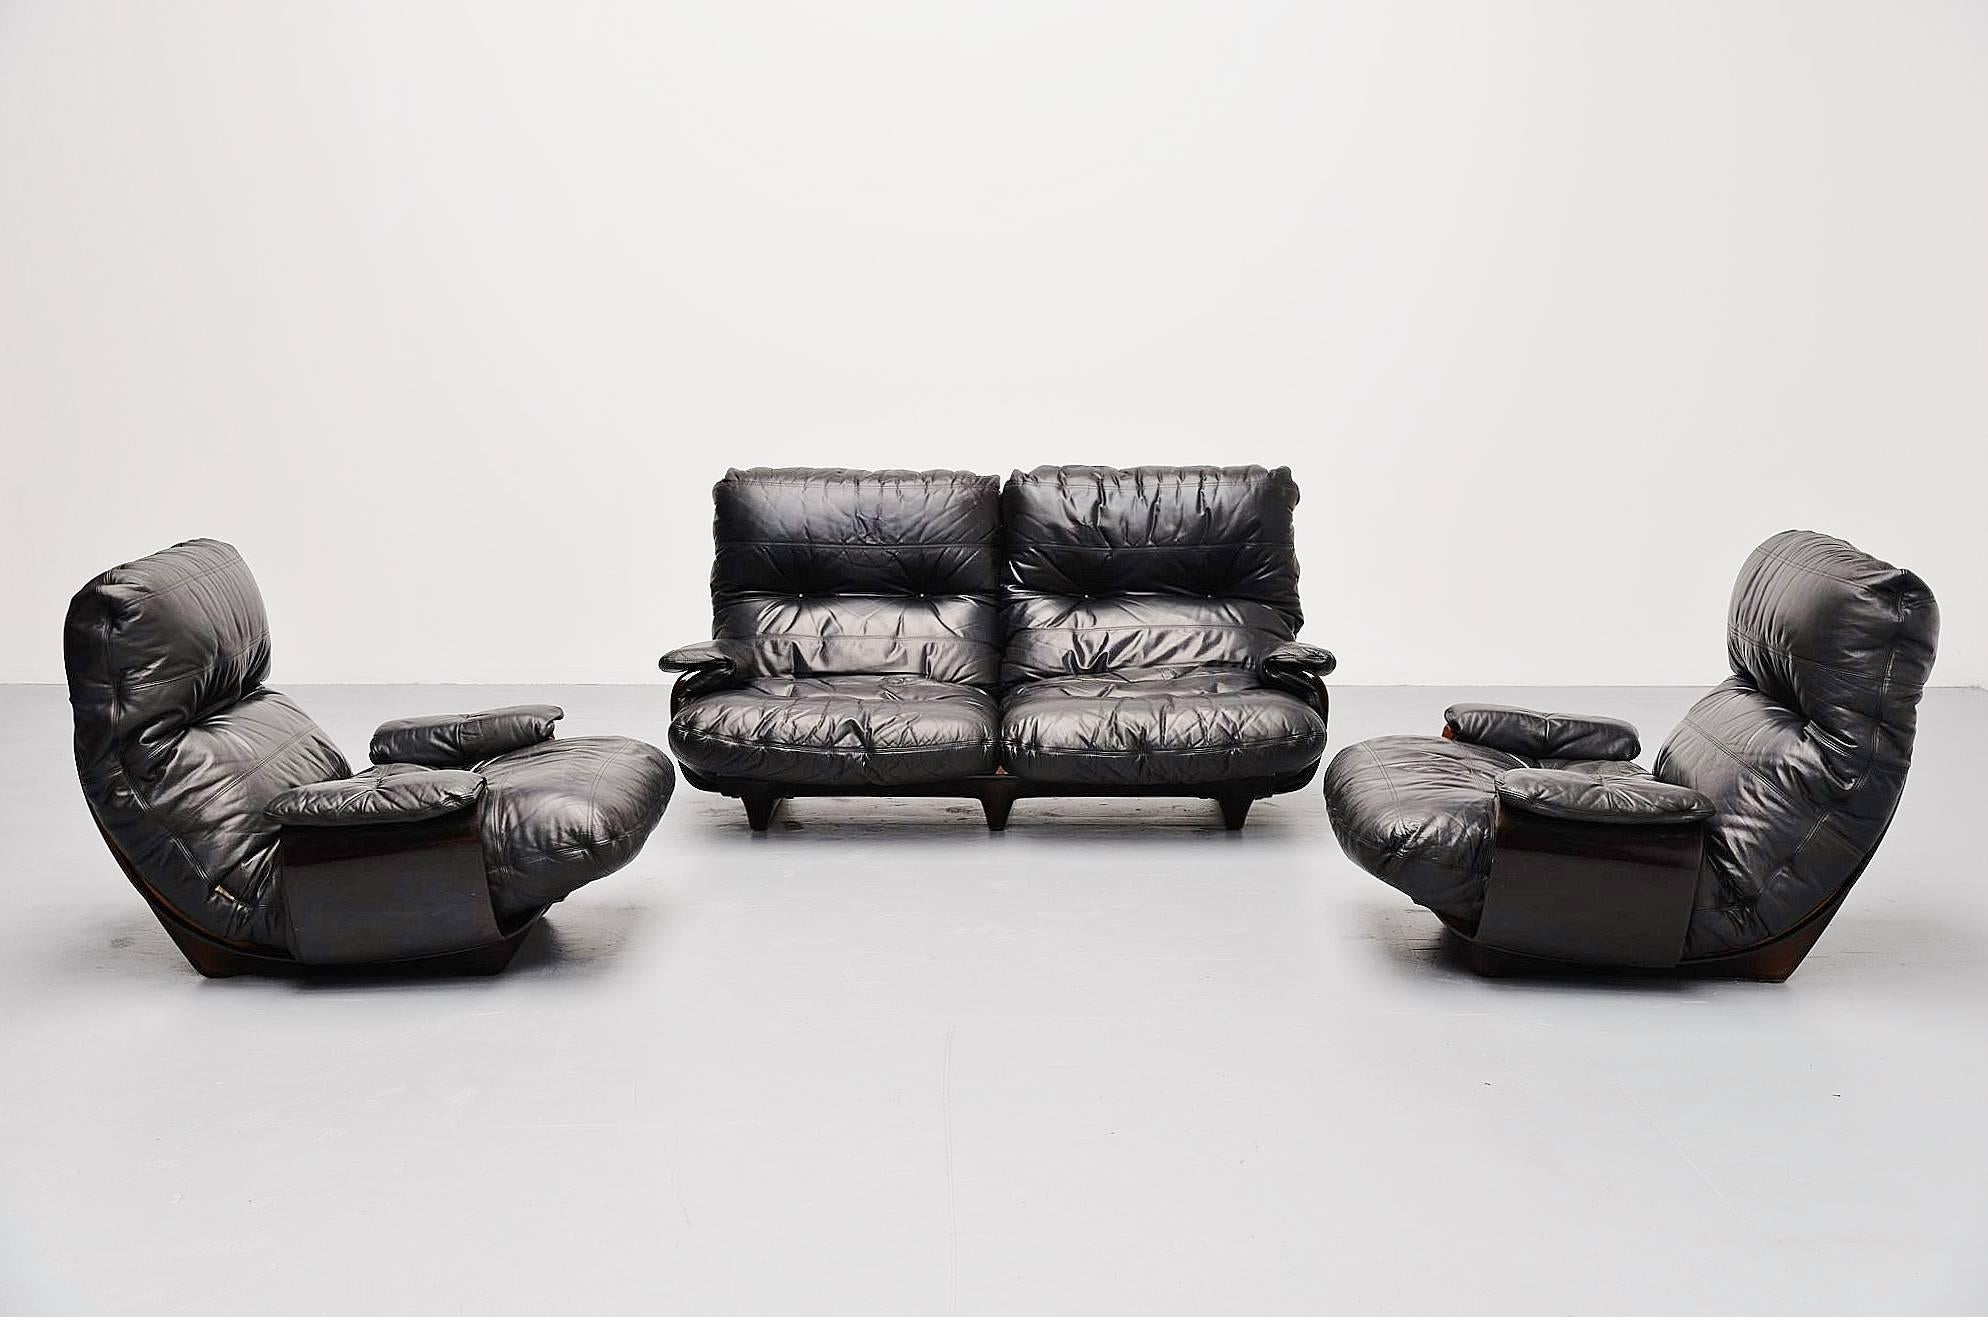 Leather Michel Ducaroy Marsala Chairs by Ligne Roset, France, 1970